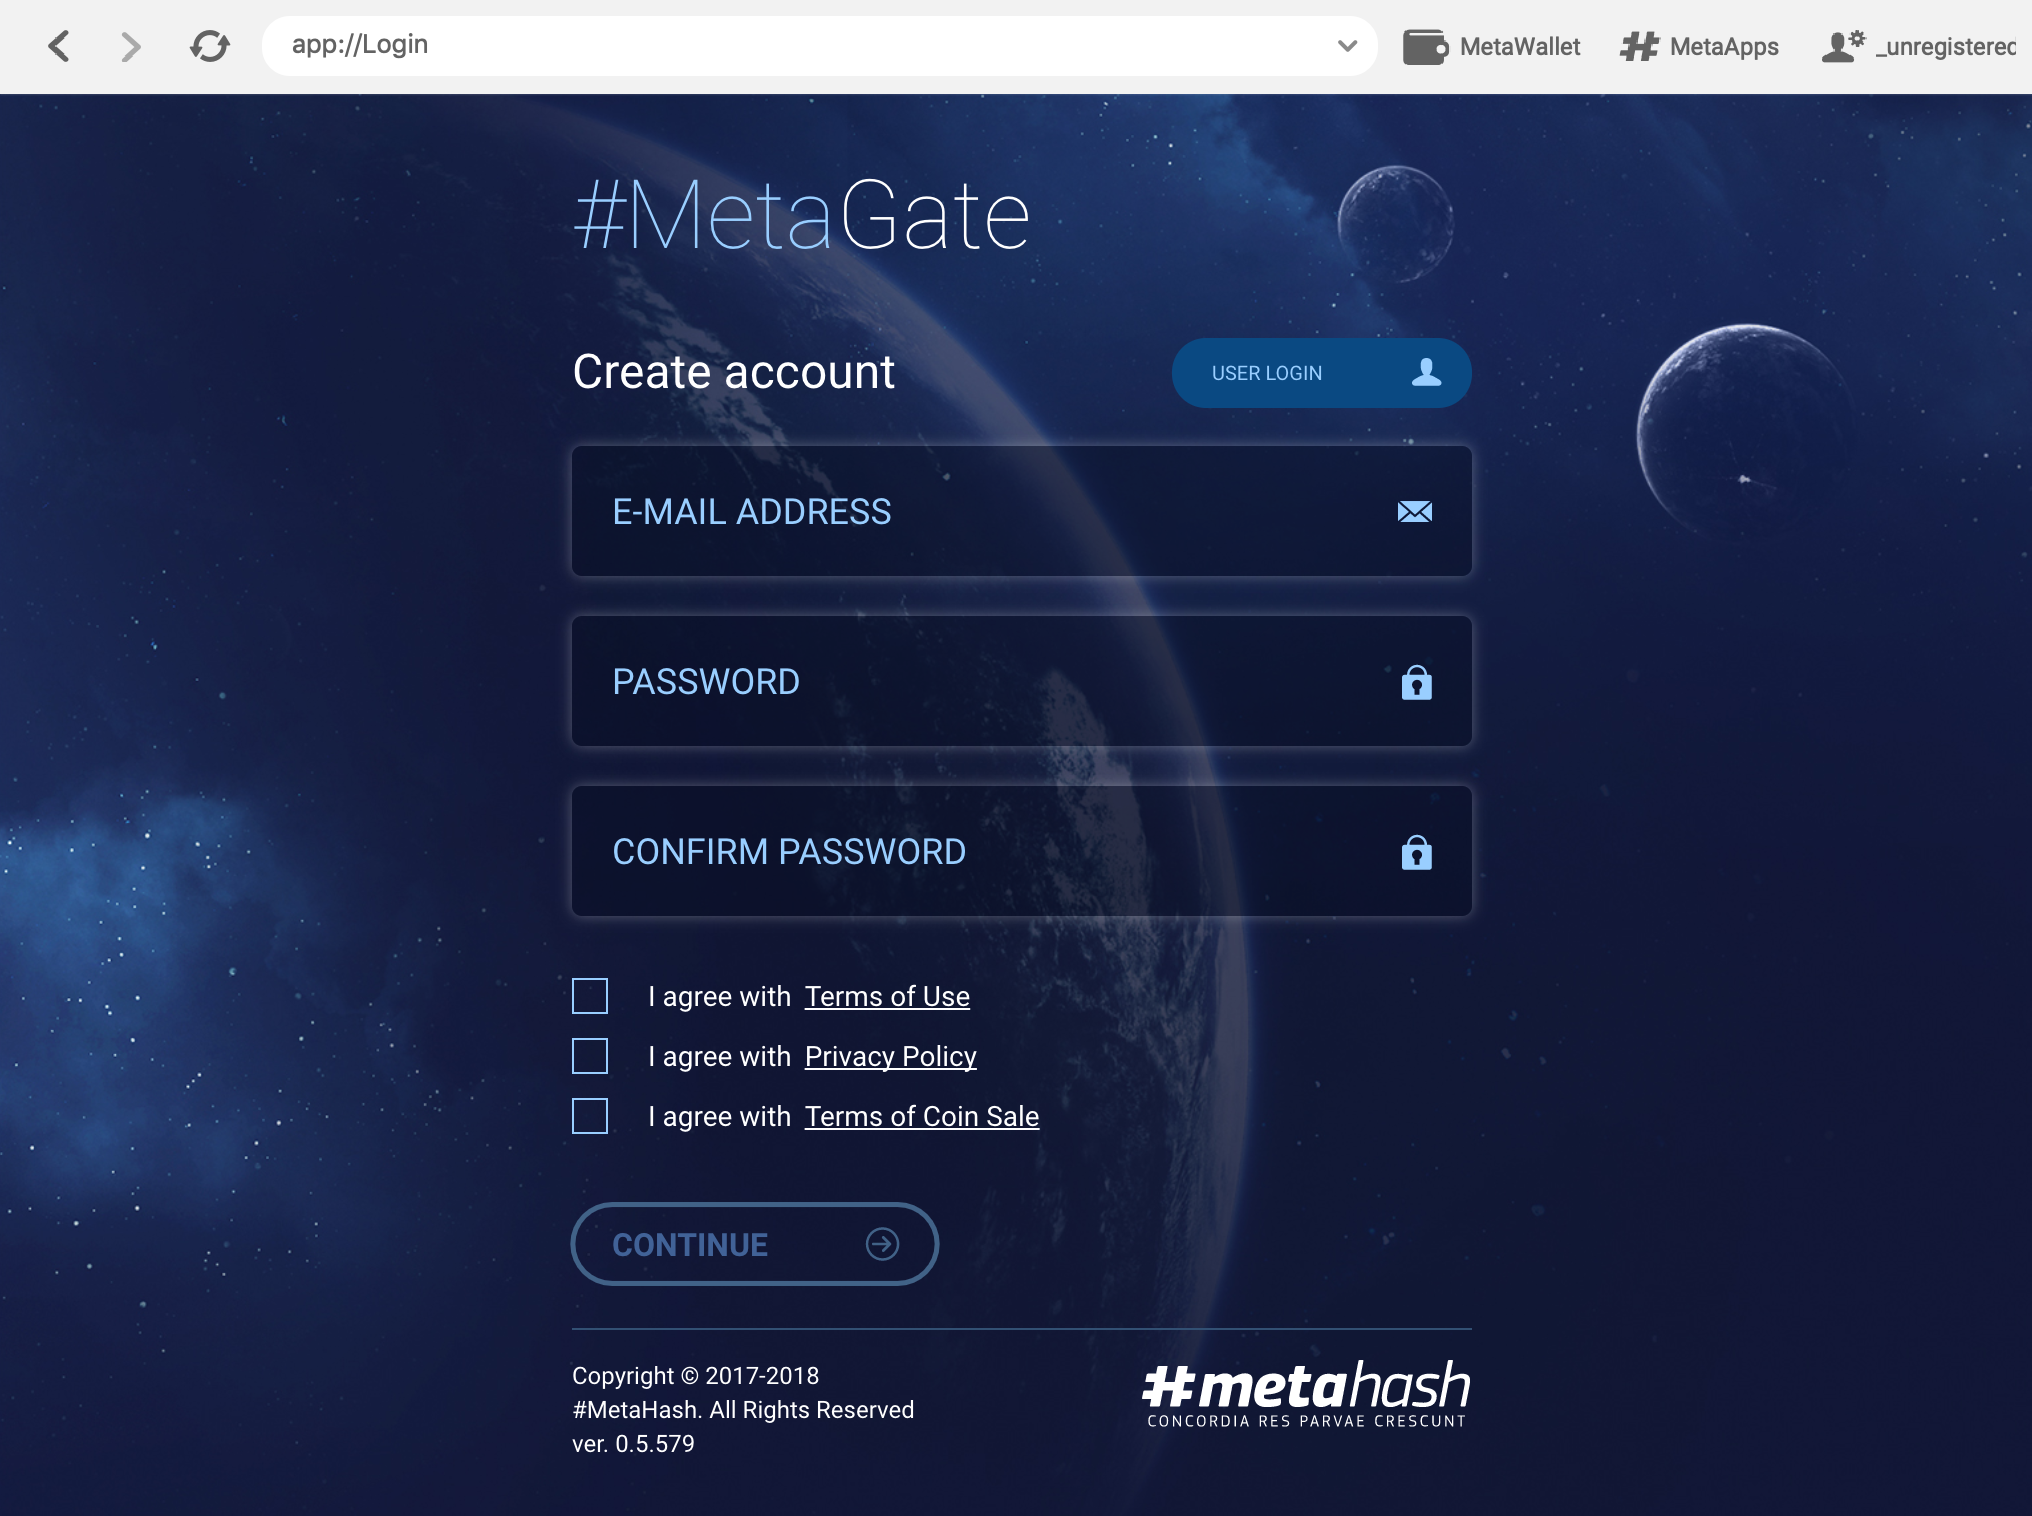 MetaGate registration page